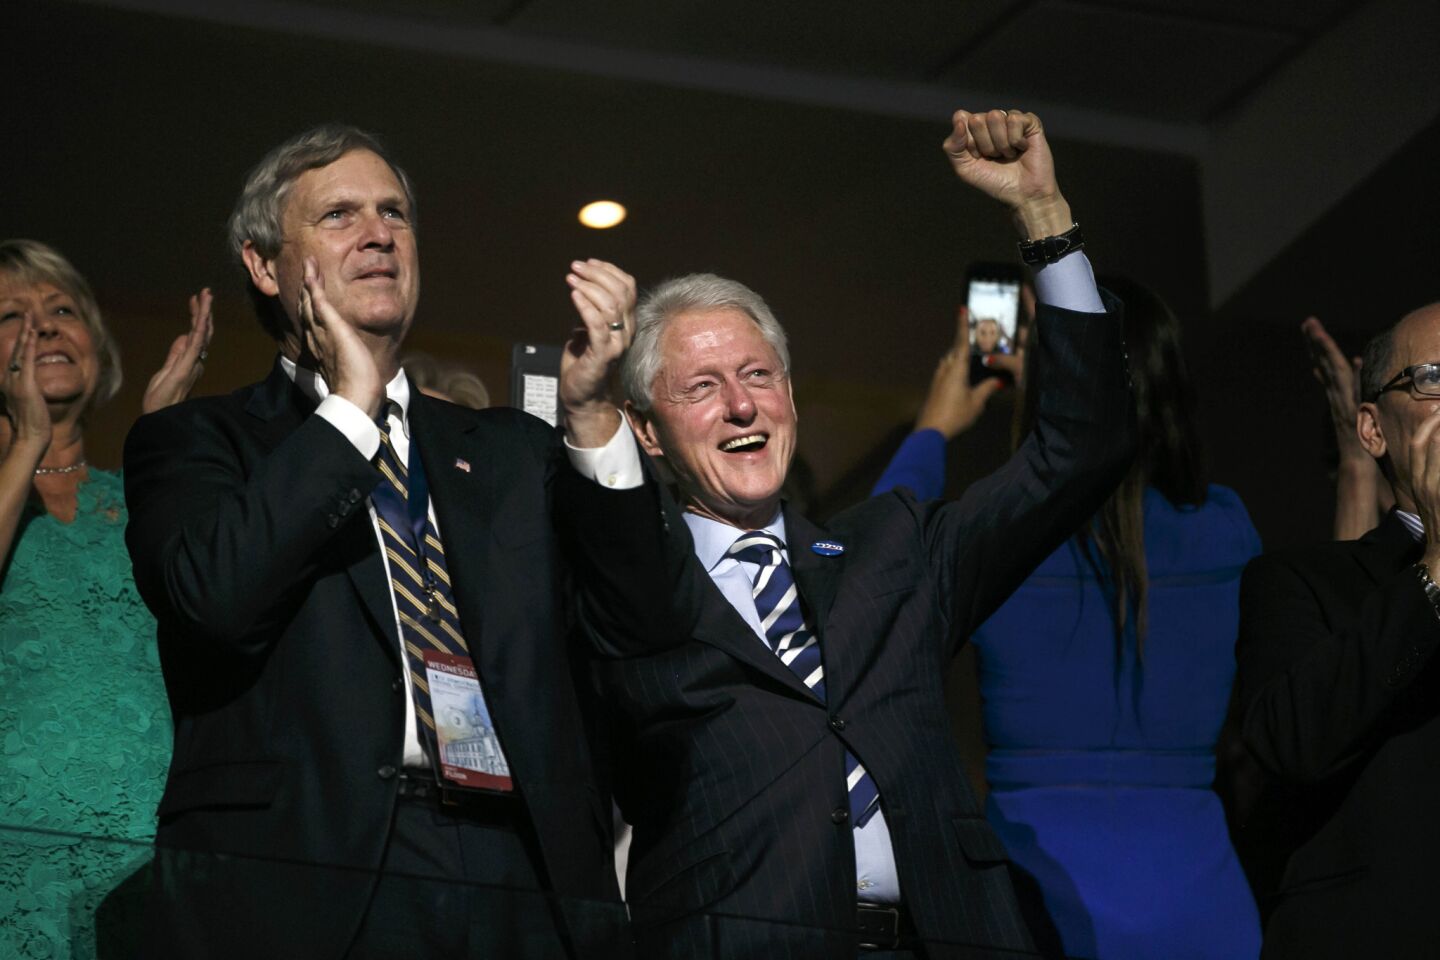 President Bill Clinton cheer as praises are sung about his wife Hillary Clinton, at the 2016 Democratic National Convention in Philadelphia.